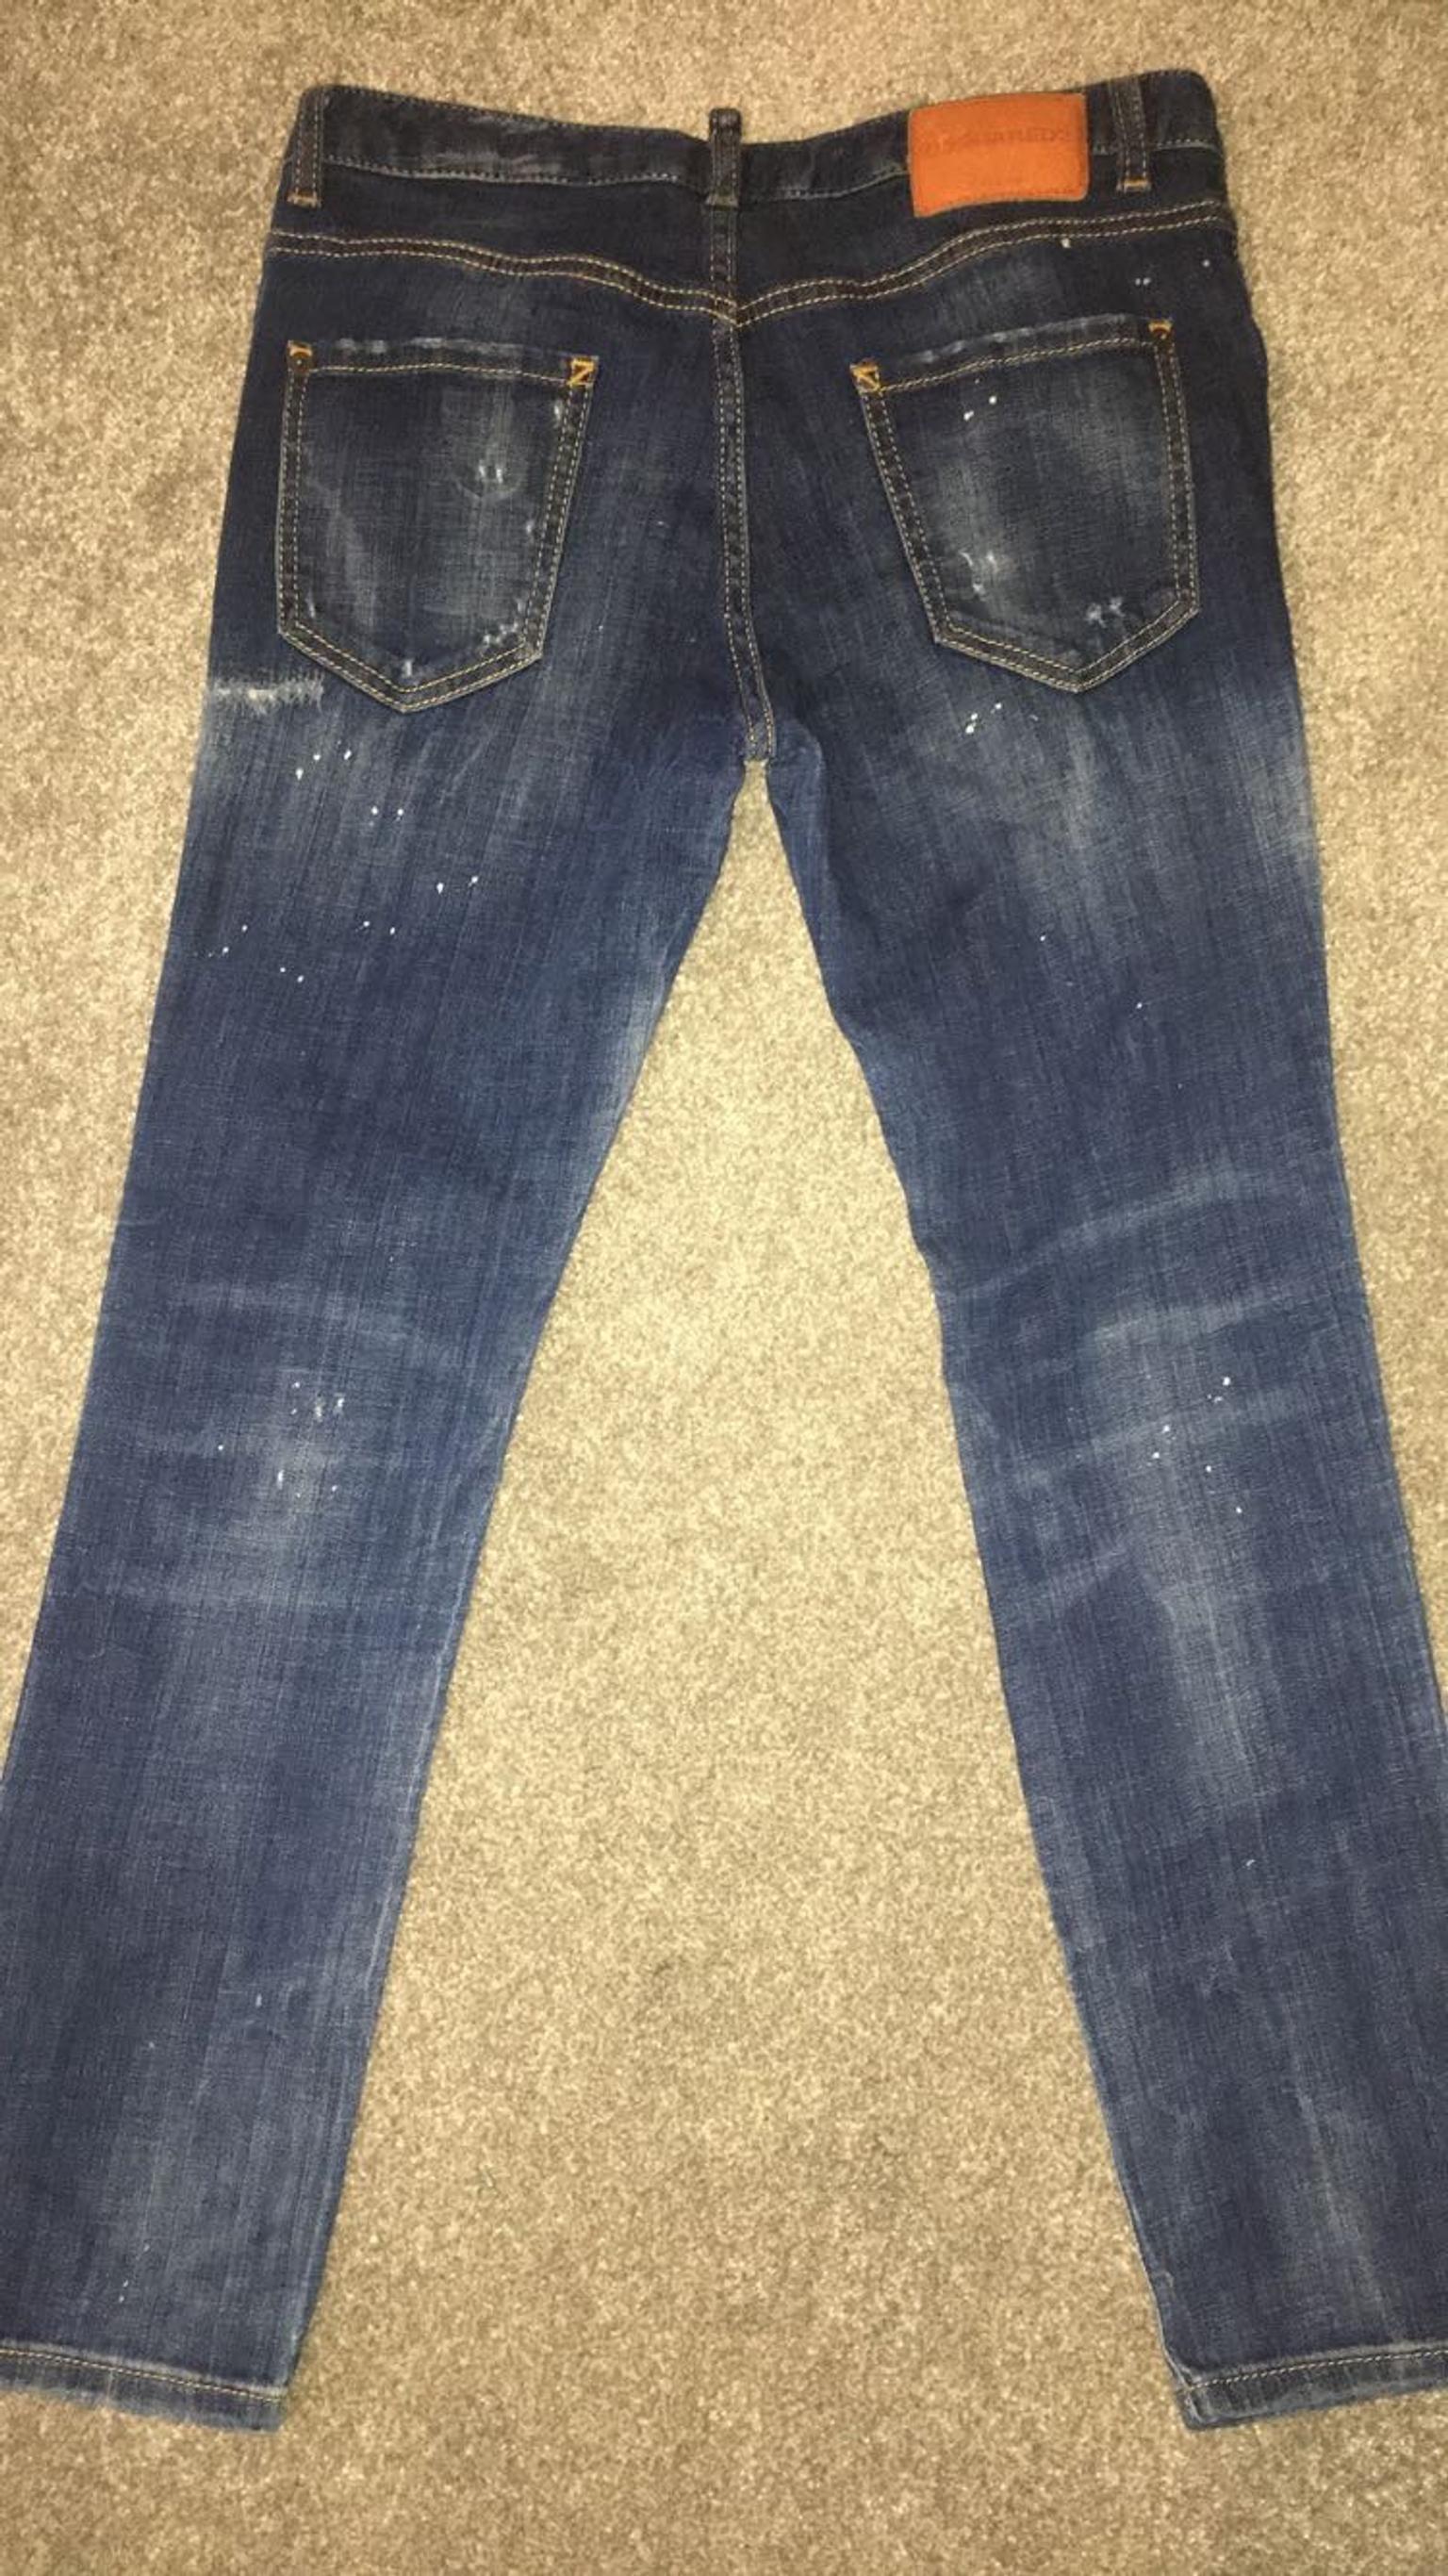 dsquared2 jeans on sale